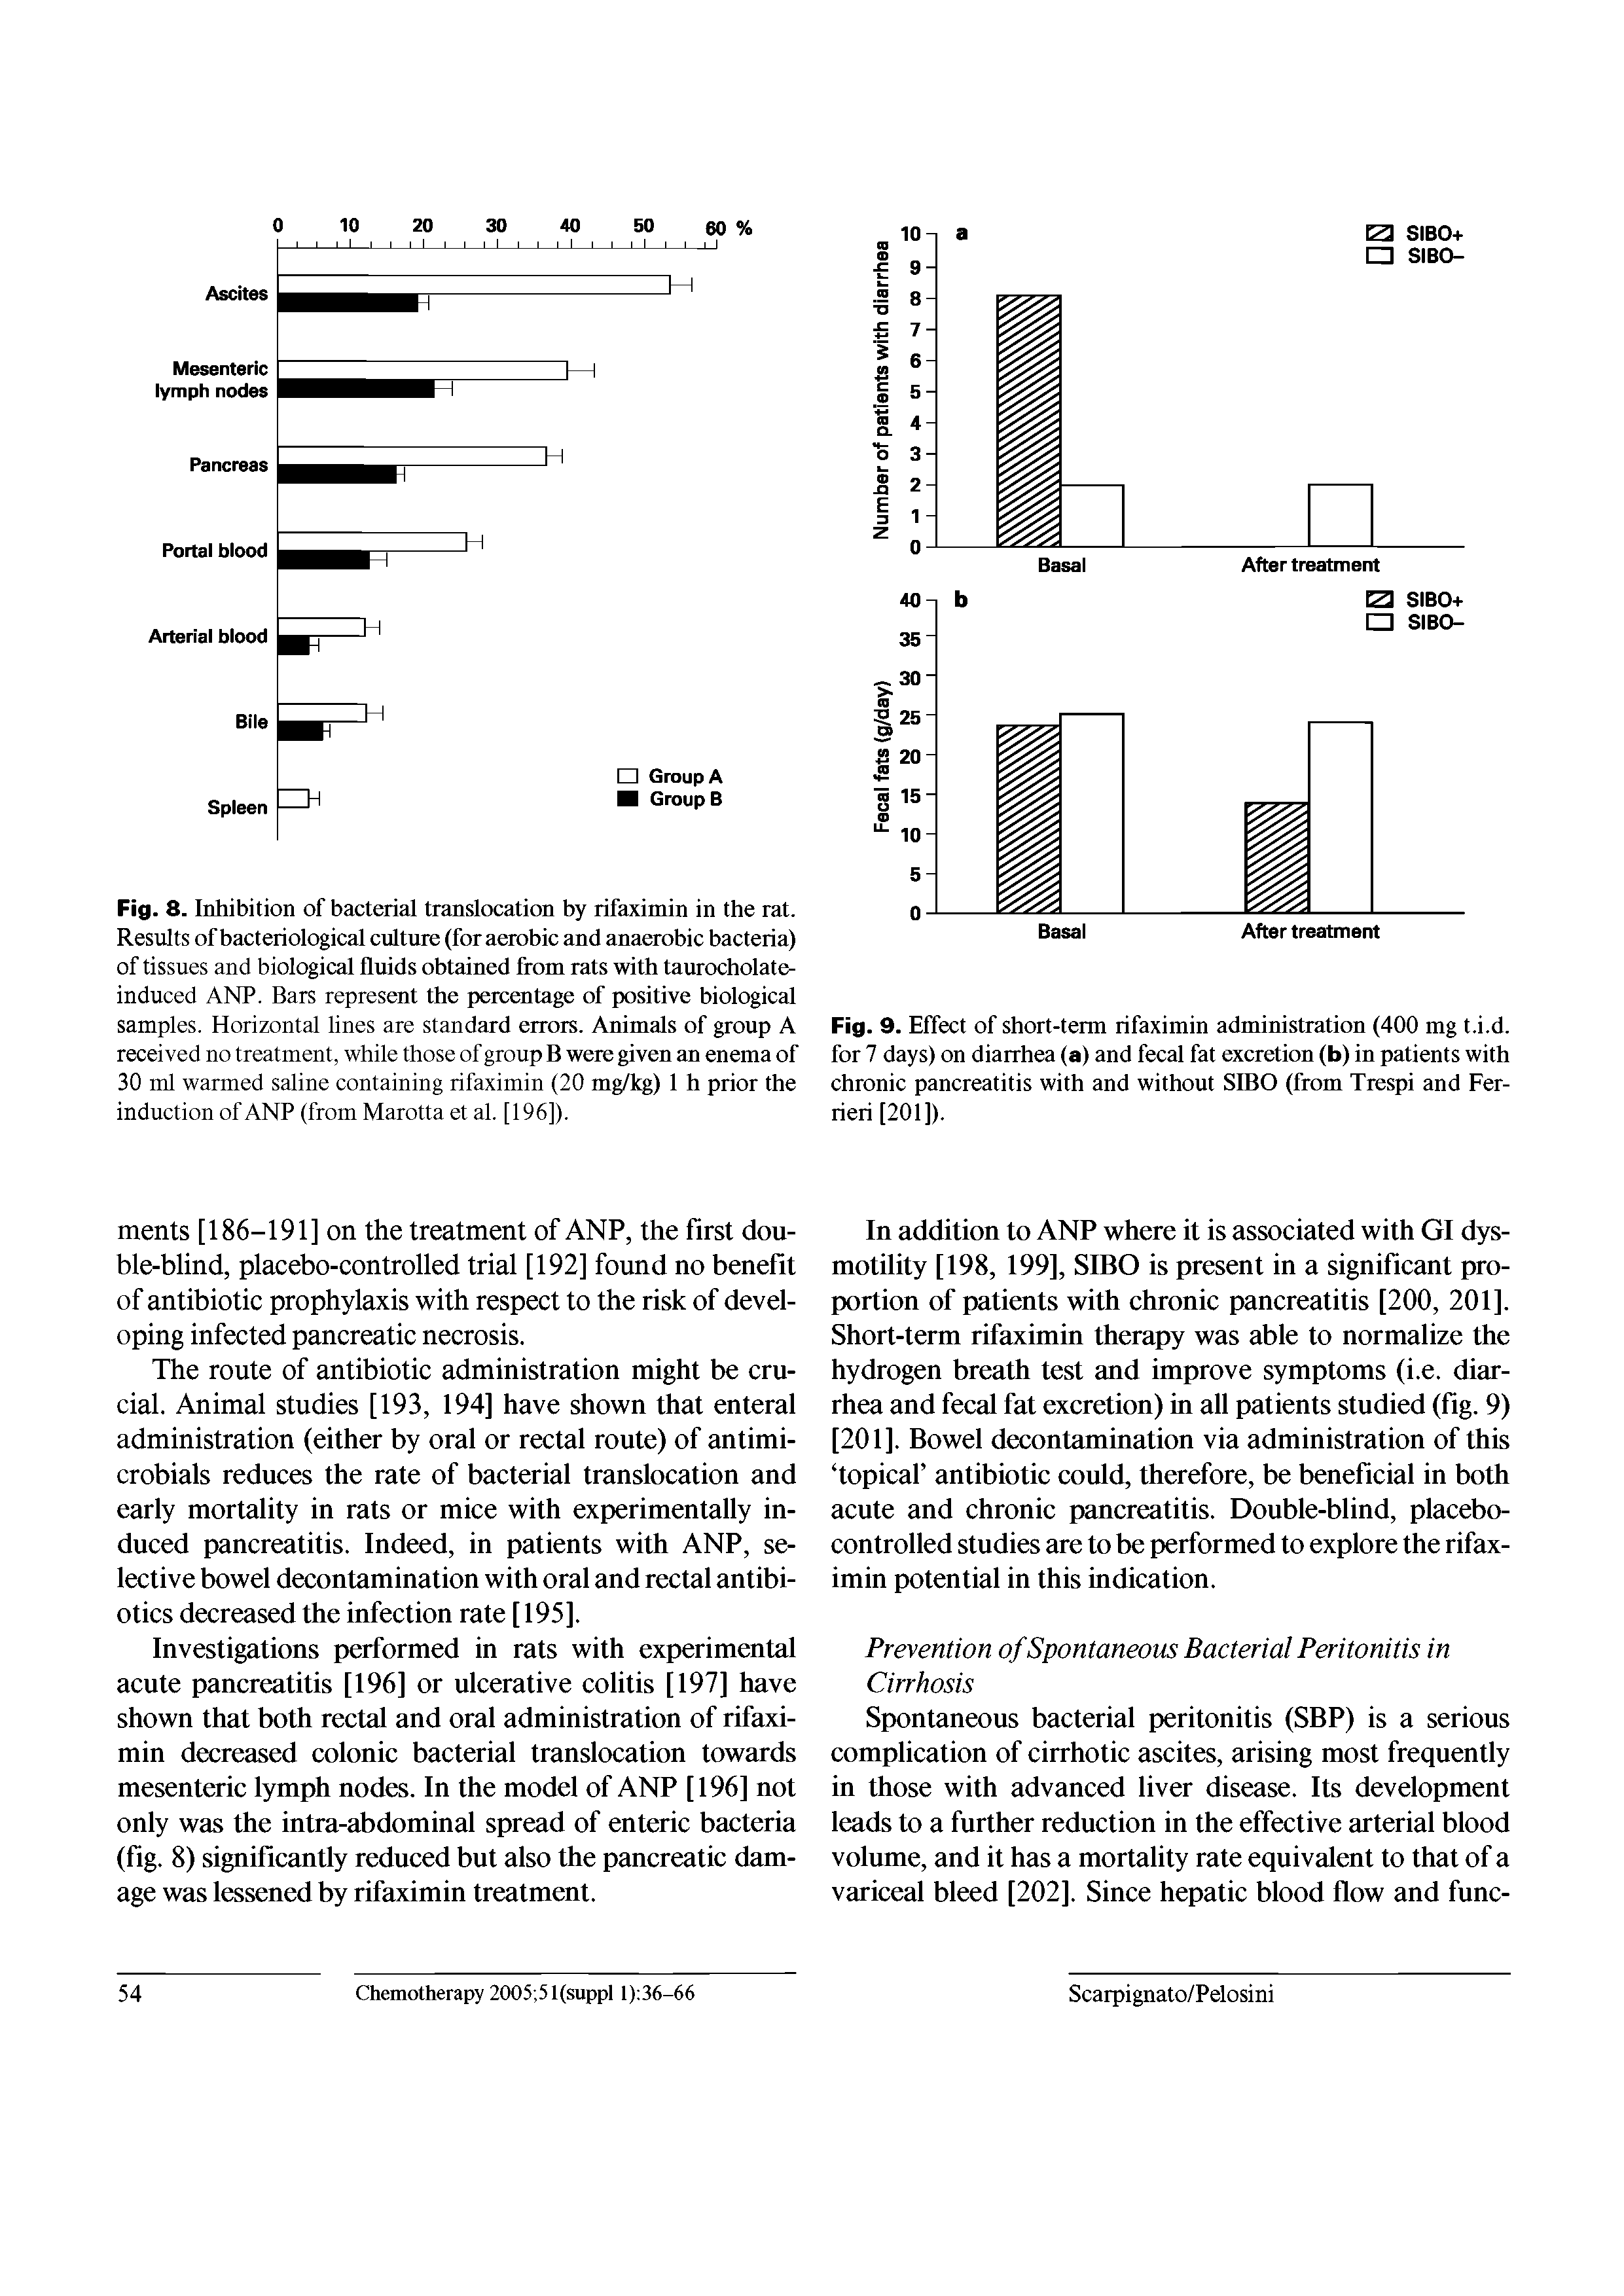 Fig. 8. Inhibition of bacterial translocation by rifaximin in the rat. Results of bacteriological culture (for aerobic and anaerobic bacteria) of tissues and biological fluids obtained from rats with taurocholate-induced ANP. Bars represent the percentage of positive biological samples. Horizontal lines are standard errors. Animals of group A received no treatment, while those of group B were given an enema of 30 ml warmed saline containing rifaximin (20 mg/kg) 1 h prior the induction of ANP (from Marotta et al. [196]).